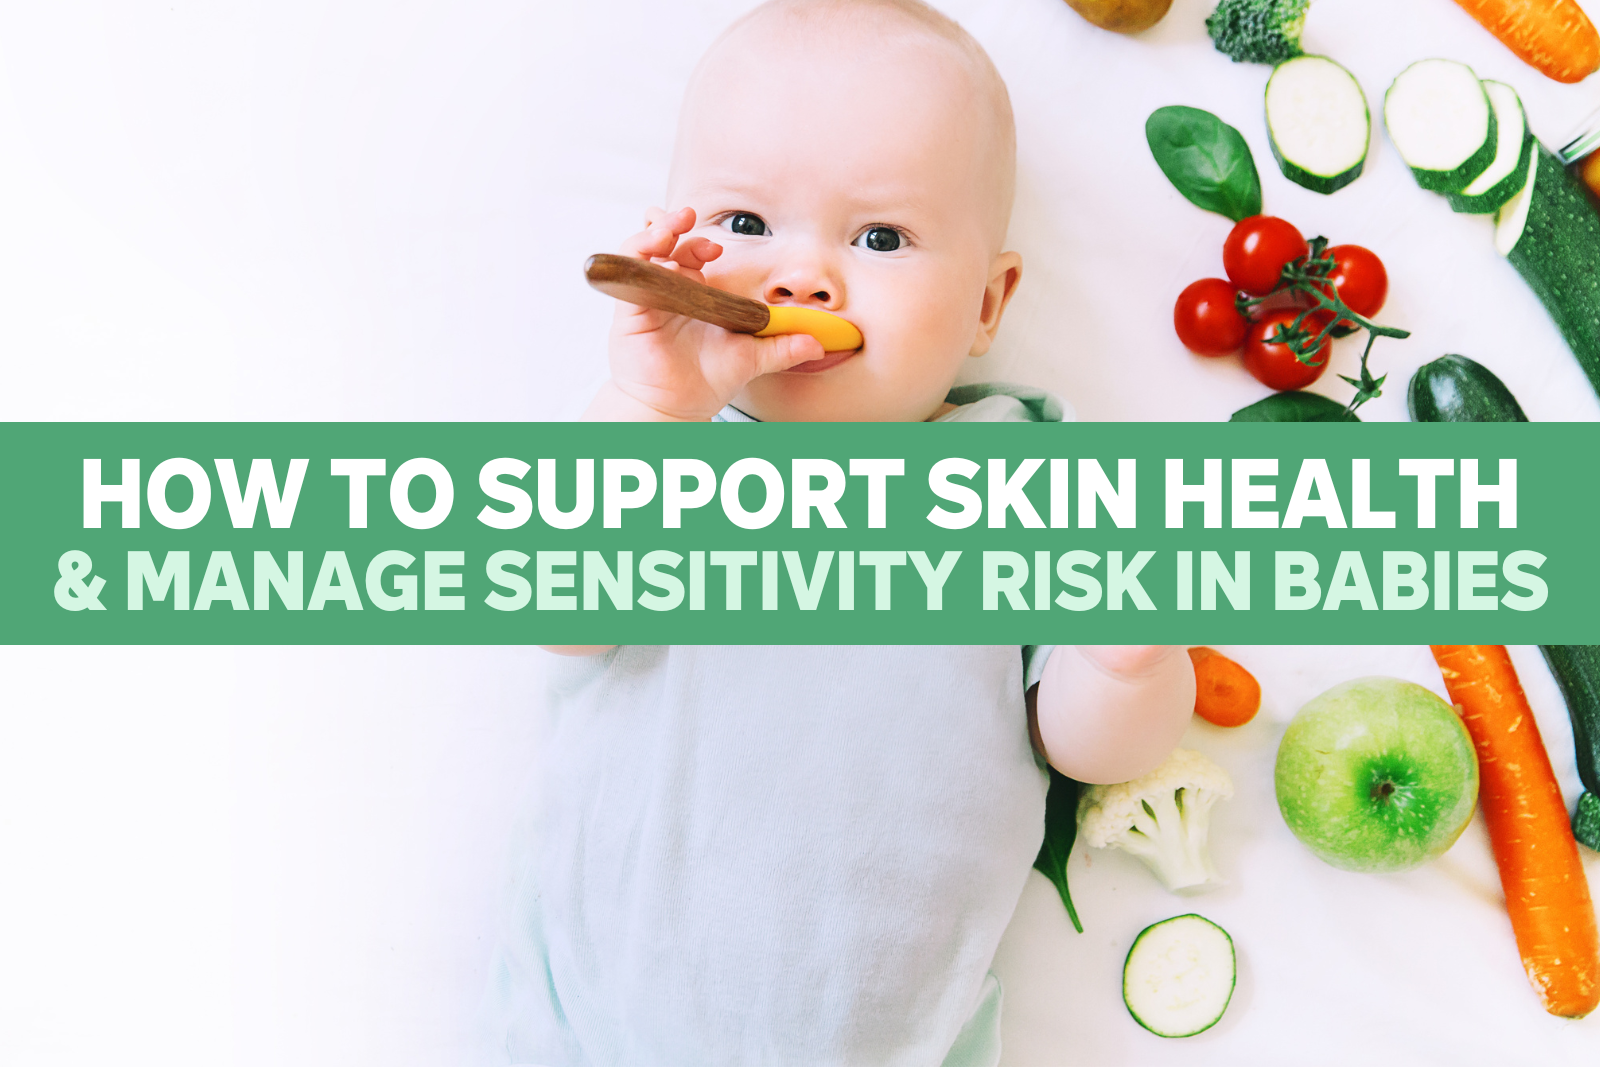 How to Support Skin Health & Manage Sensitivity Risk in Babies